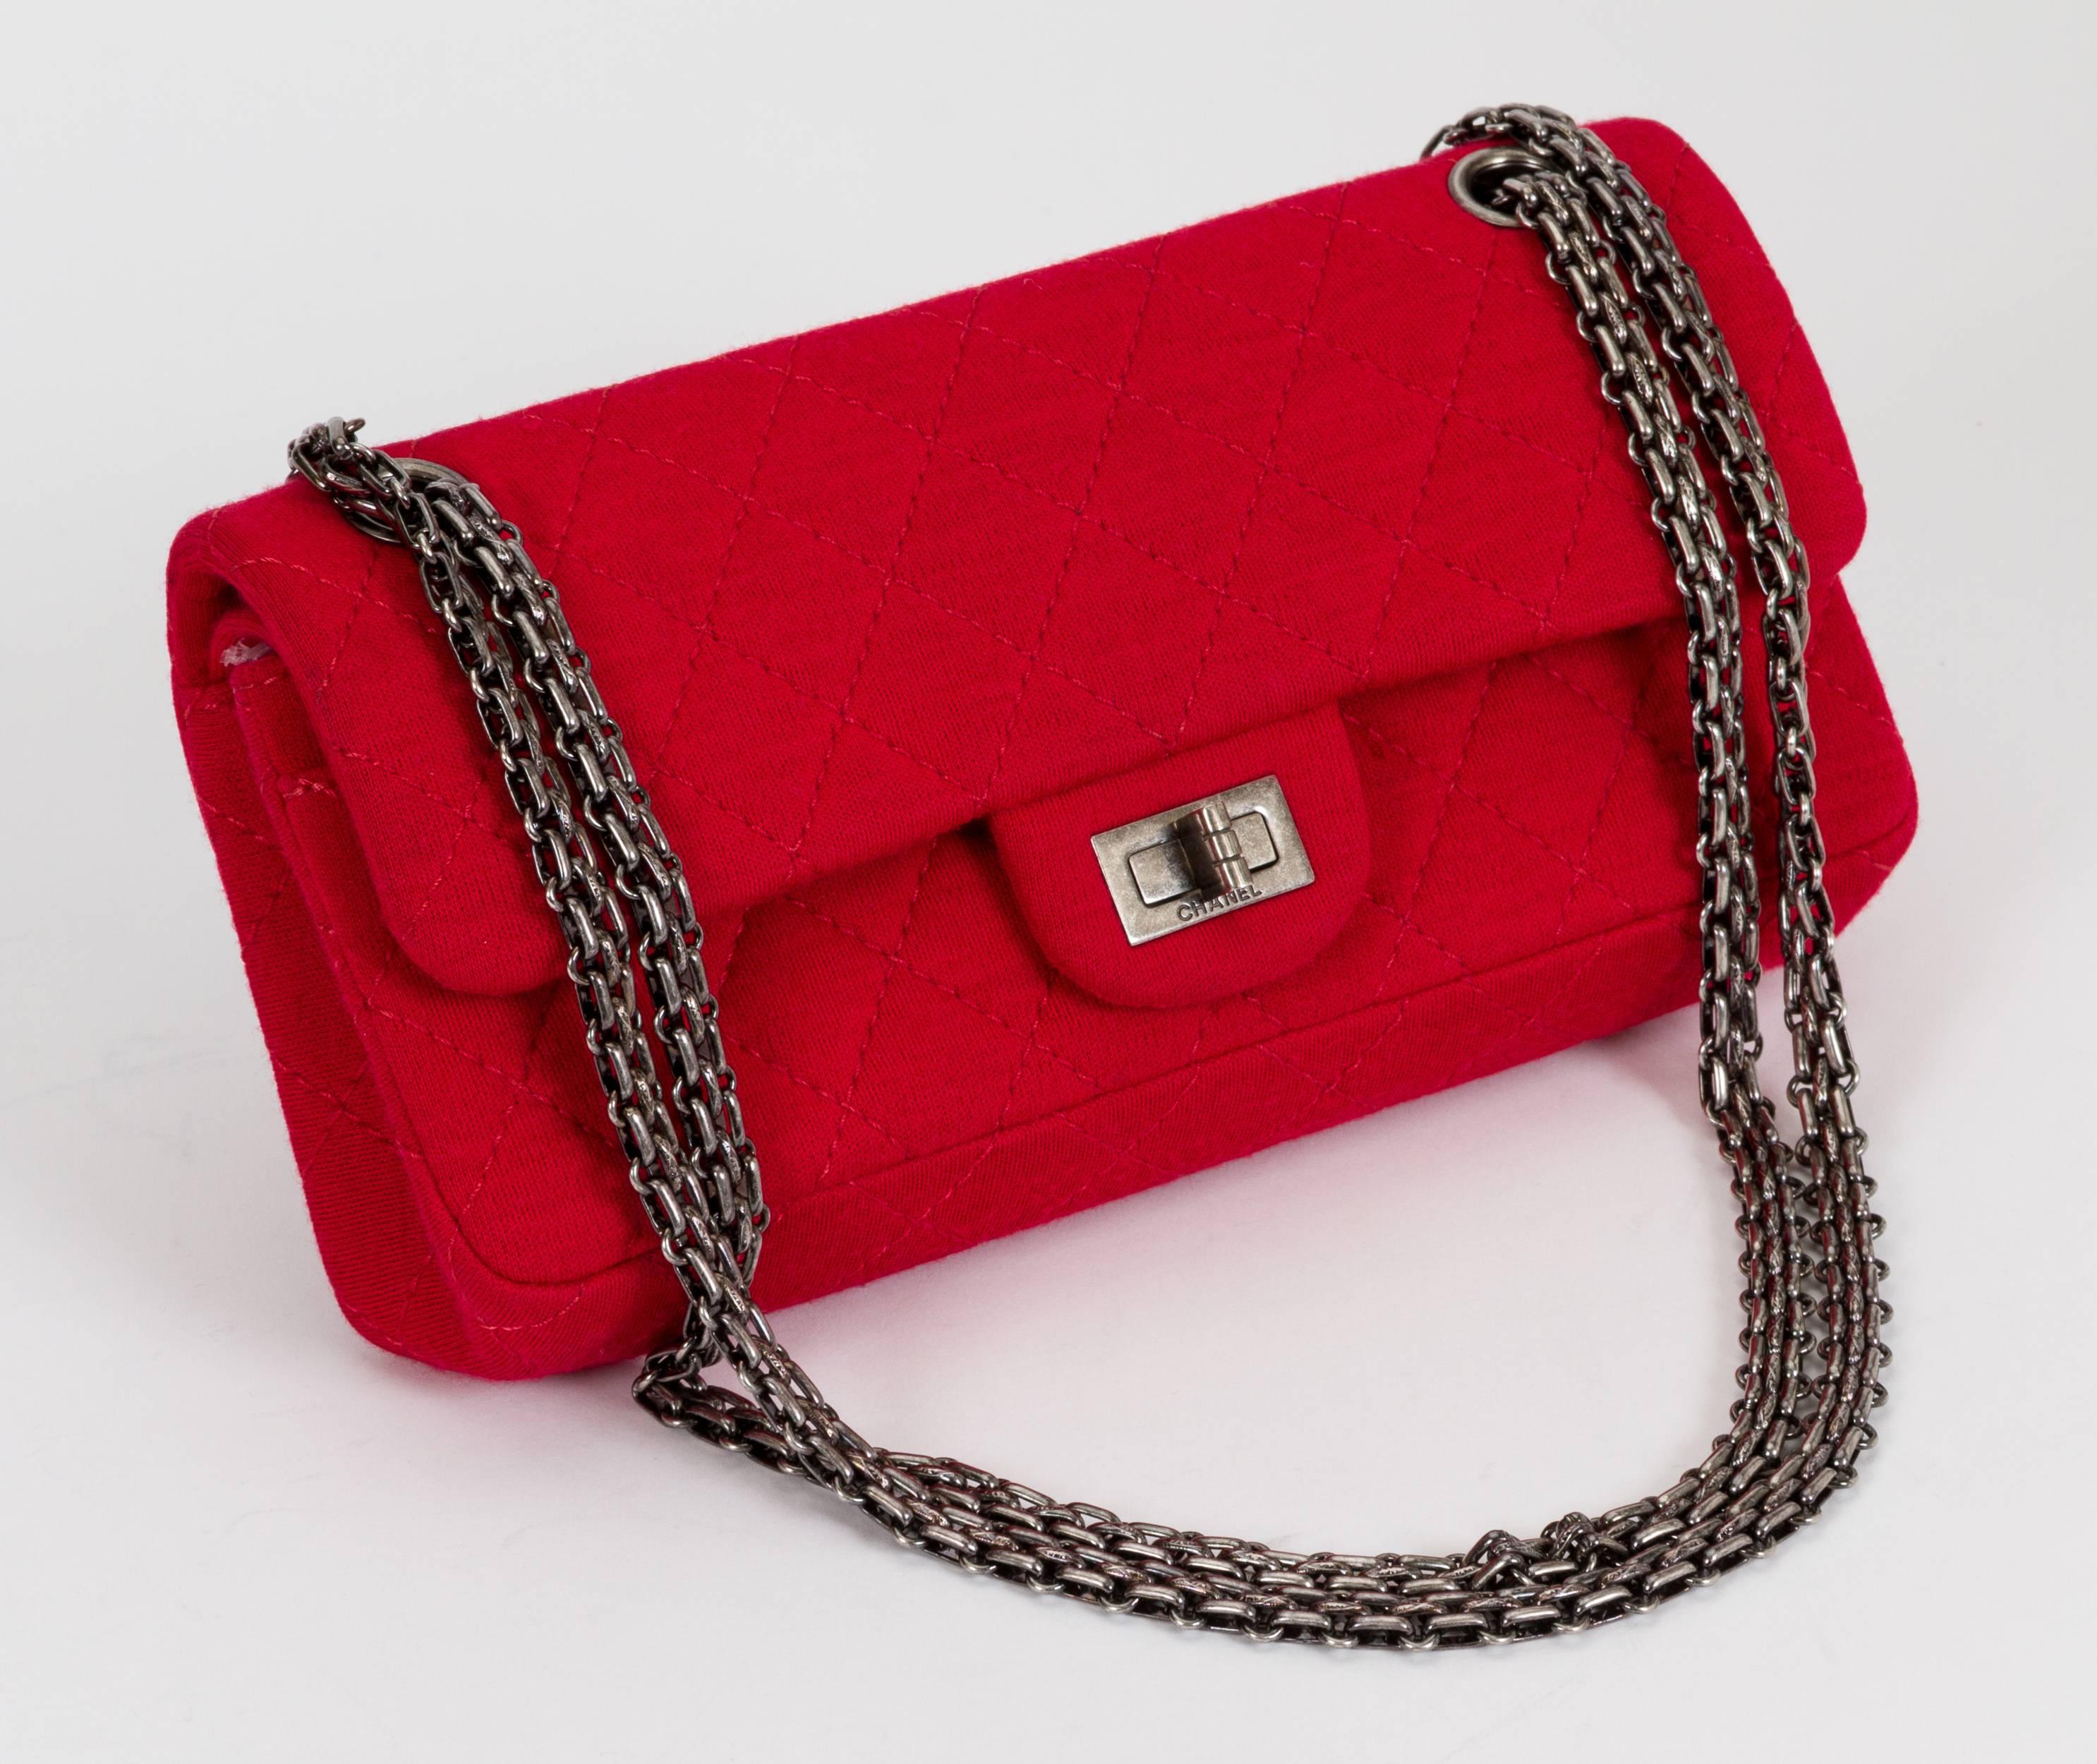 Chanel red jersey quilted double flap with ruthenium mademoiselle chain hardware. Shoulder drop, 11.5